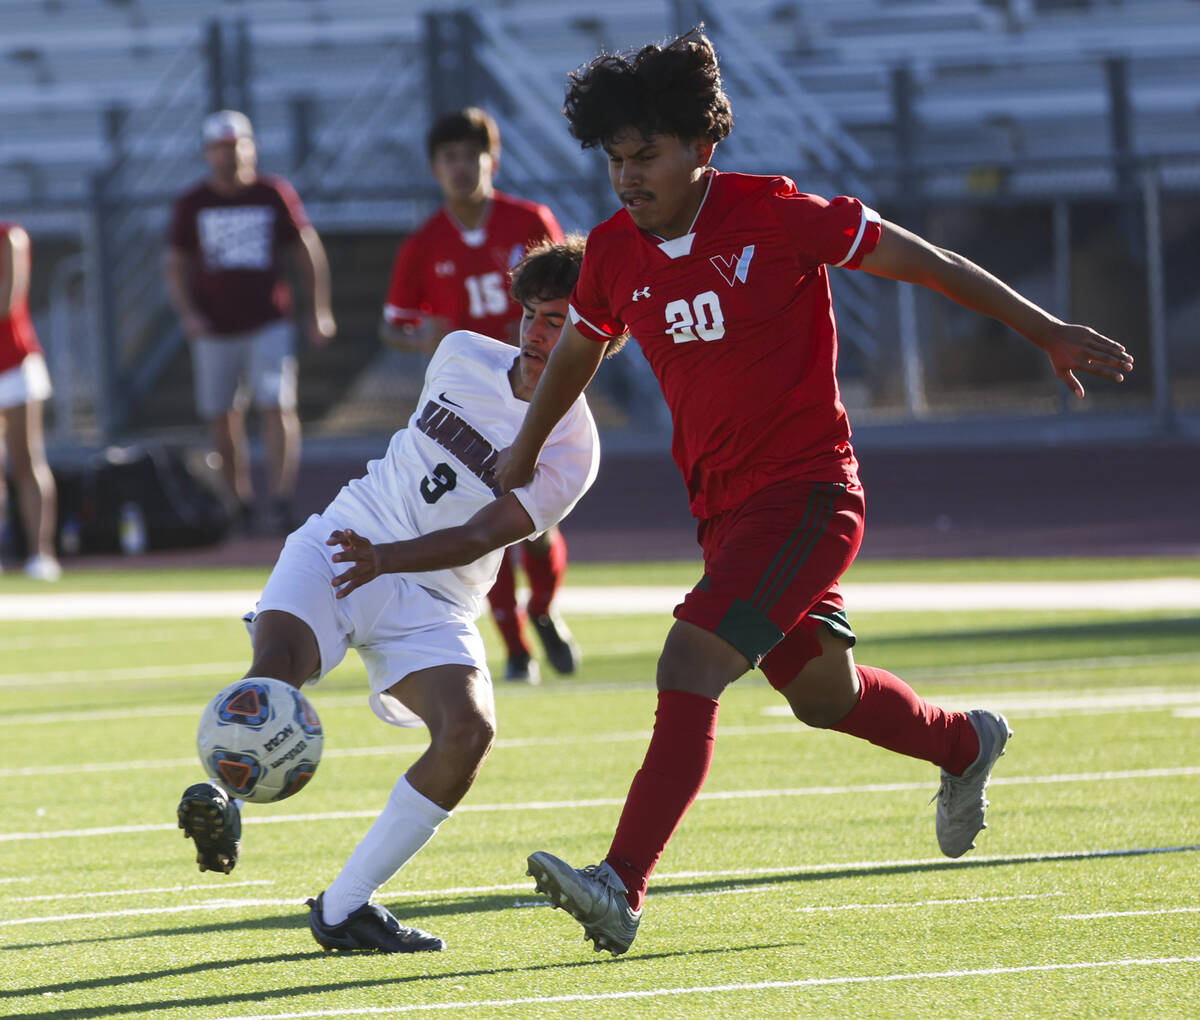 Desert Oasis' Lazzar Ramos (3) and Western's Alex Rodriguez (20) battle for the ball during a s ...